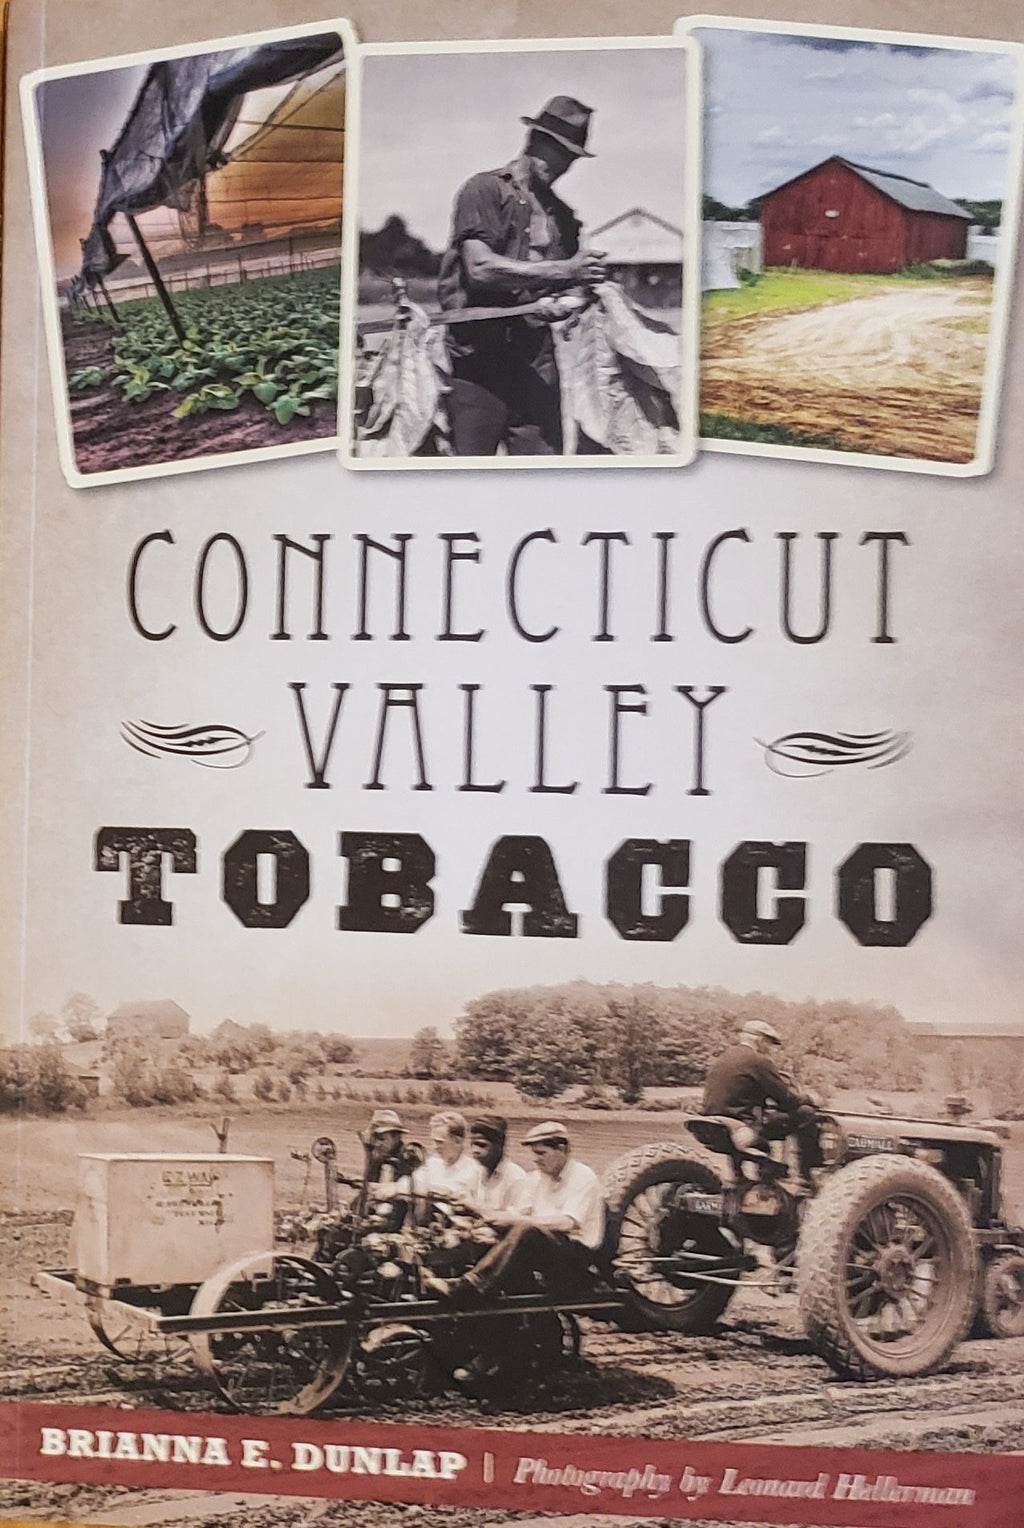 Connecticut Valley Tobacco by Brianna E. Dunlap